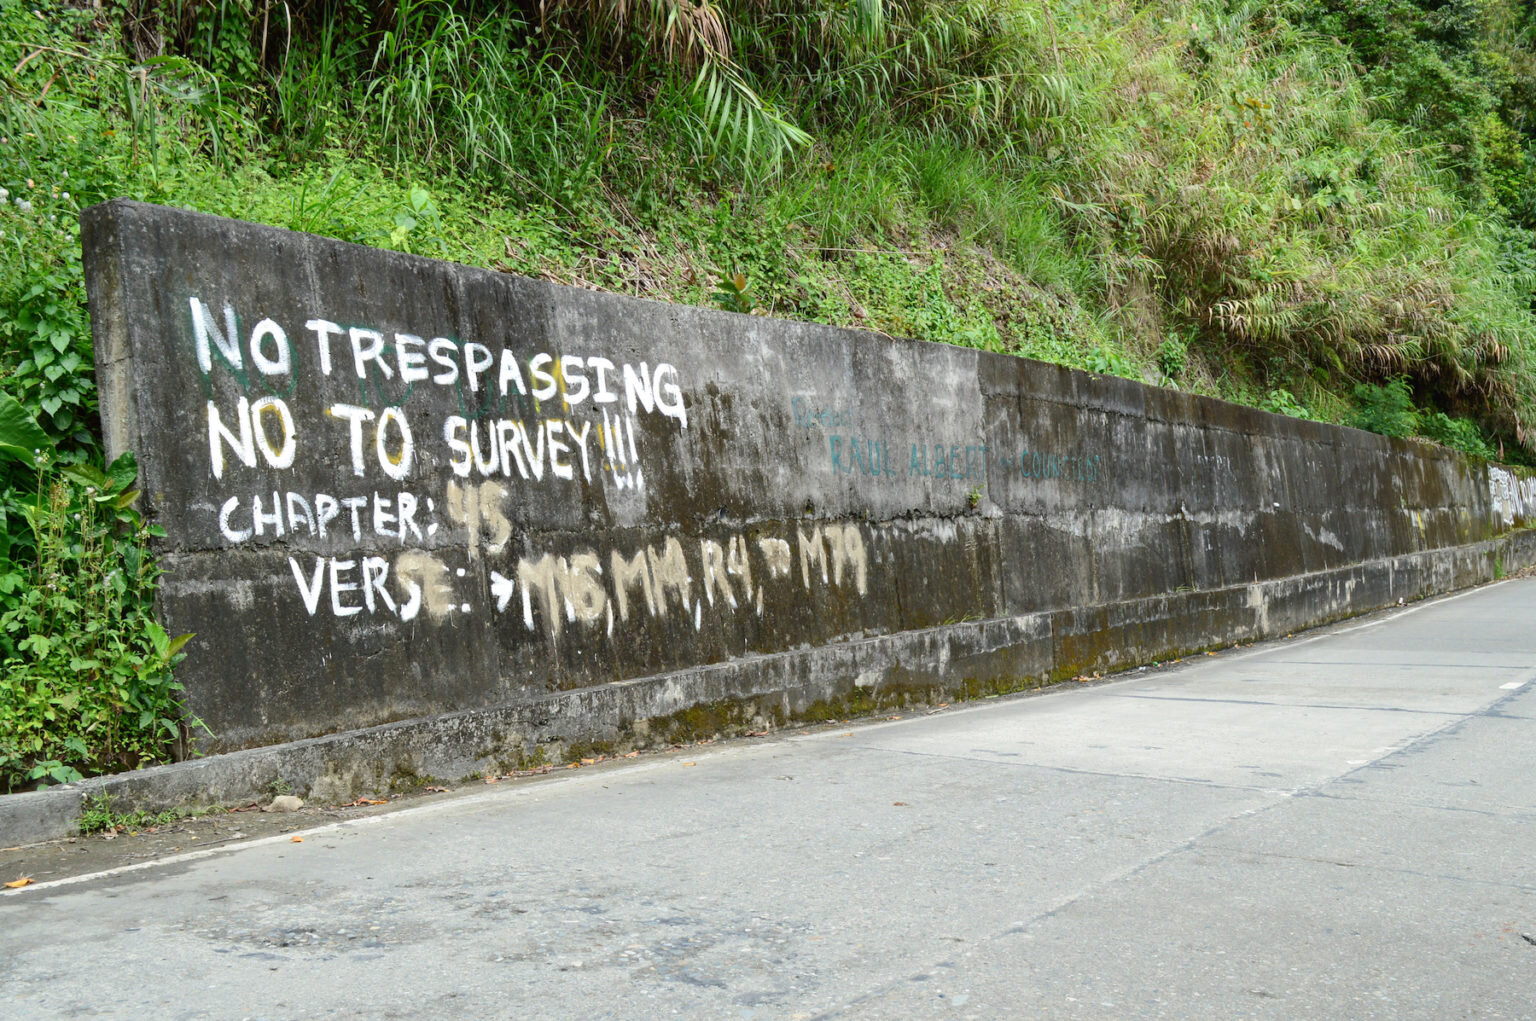 A roadside retaining wall vandalized with anti-dam messages. Image by Karlston Lapniten for Mongabay